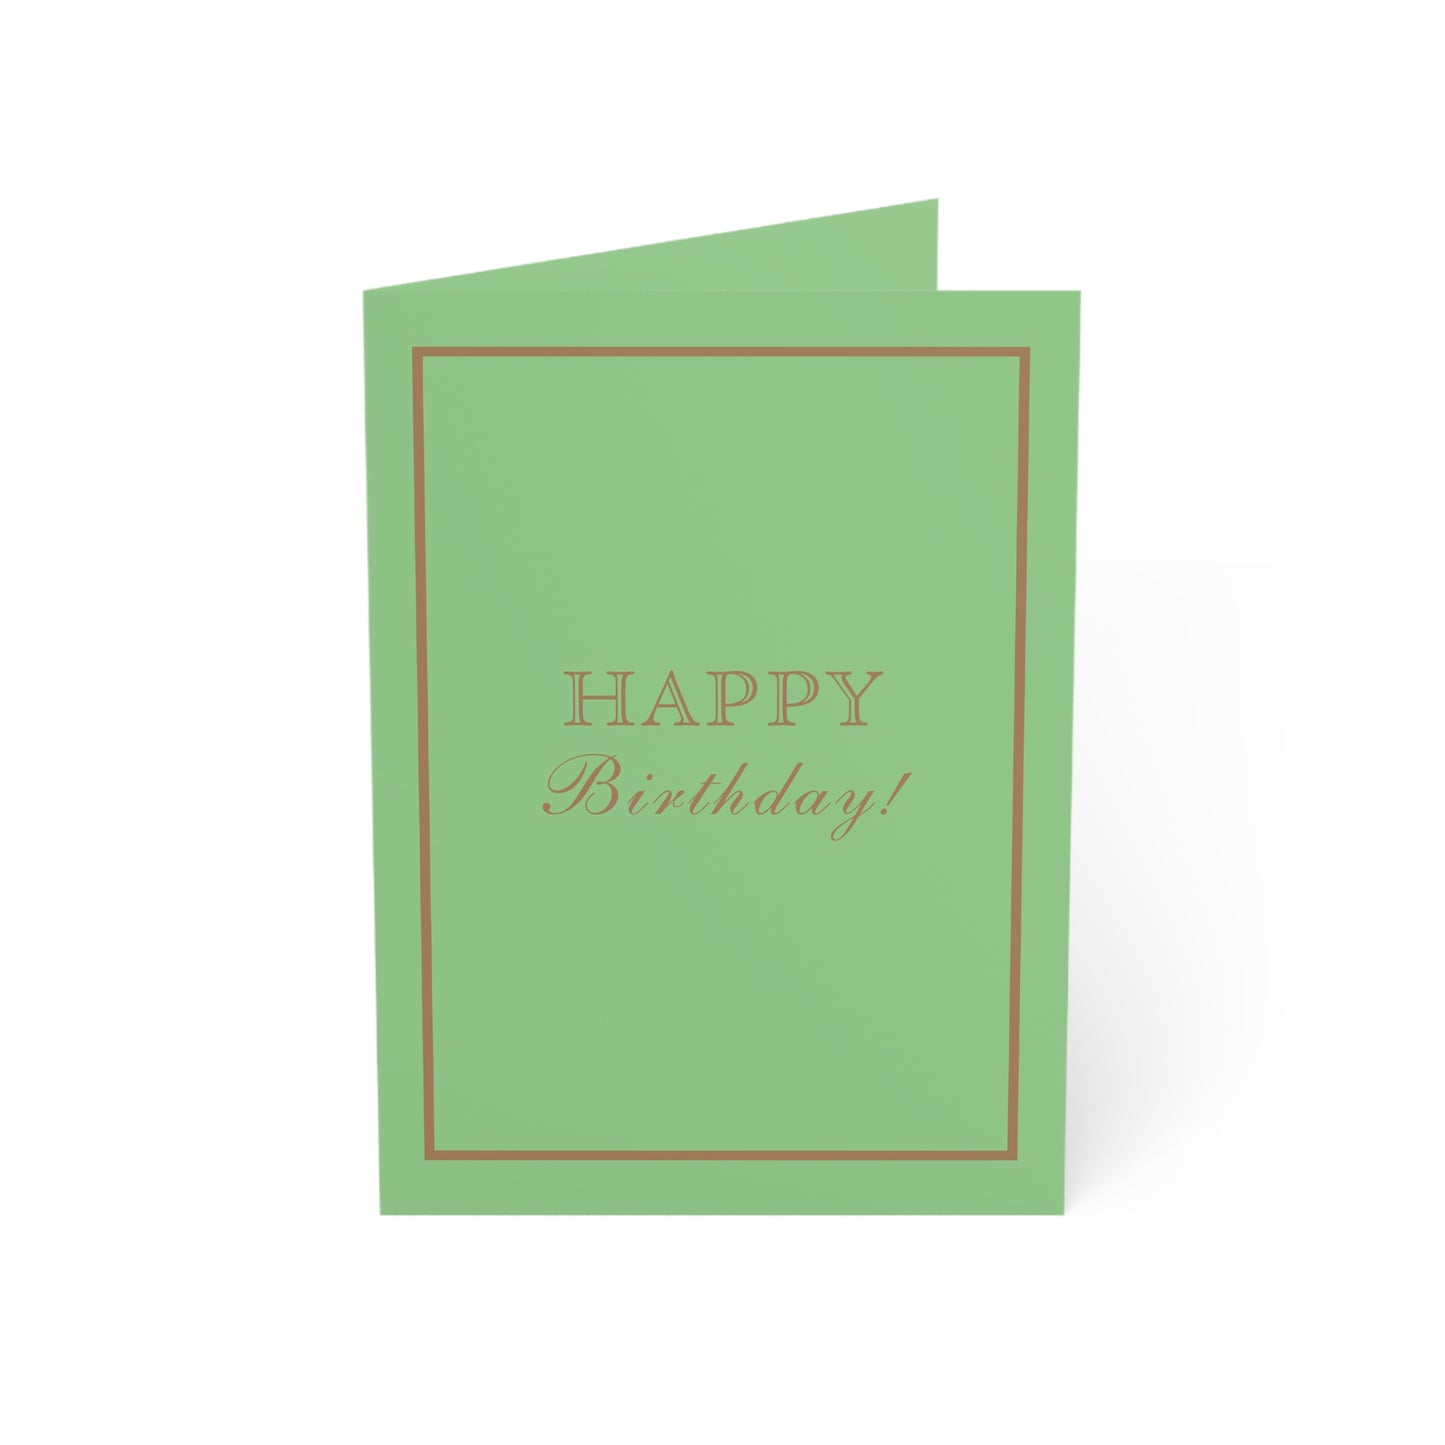 Happy Birthday Cards in Green